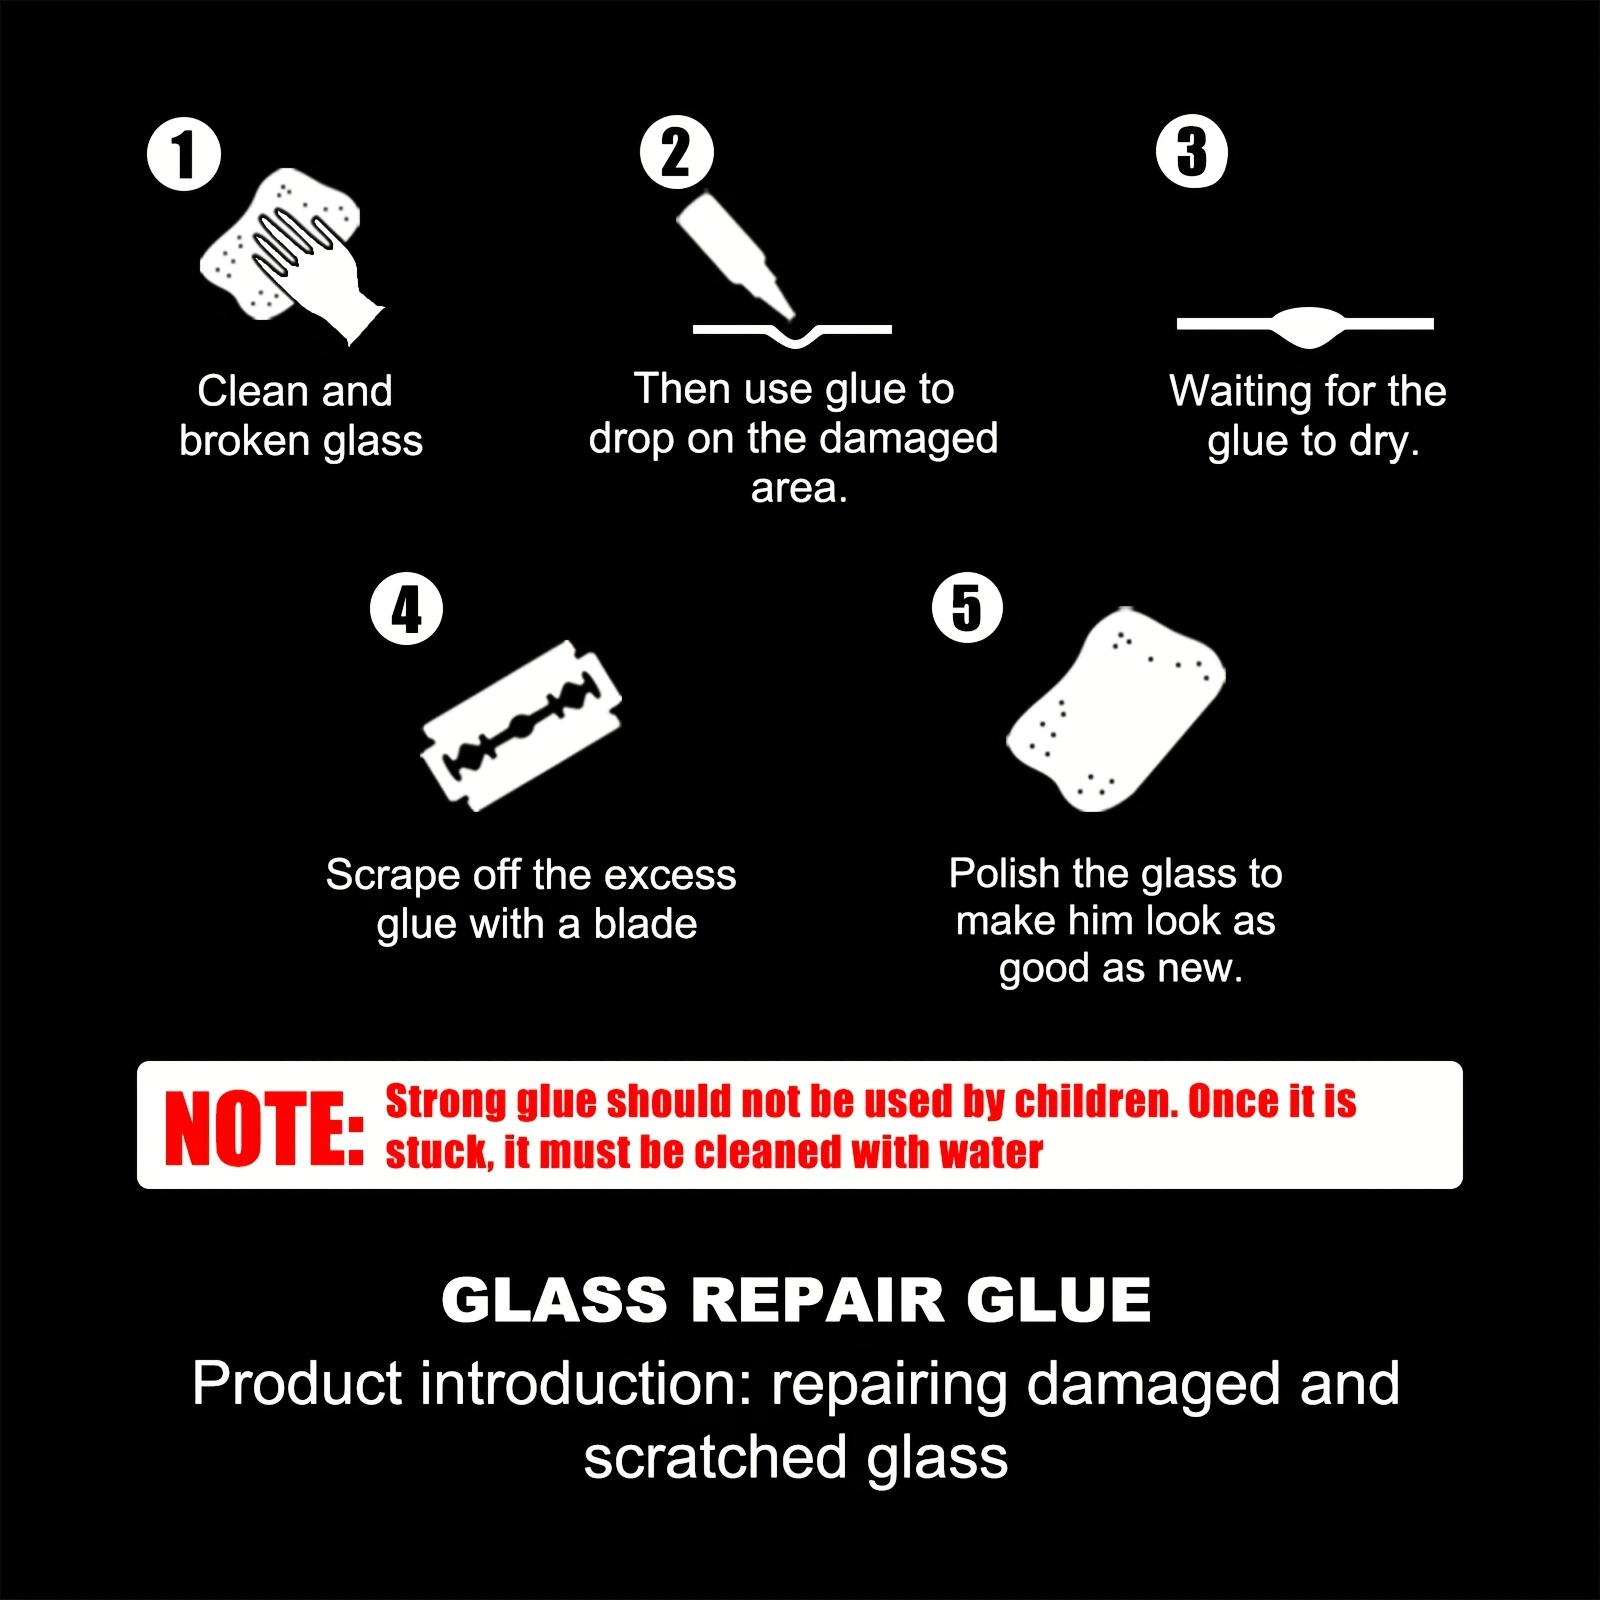 QUICK AND RELIABLE Car Glass Repair Fluid for Windshield Scratch/Crack  $18.12 - PicClick AU